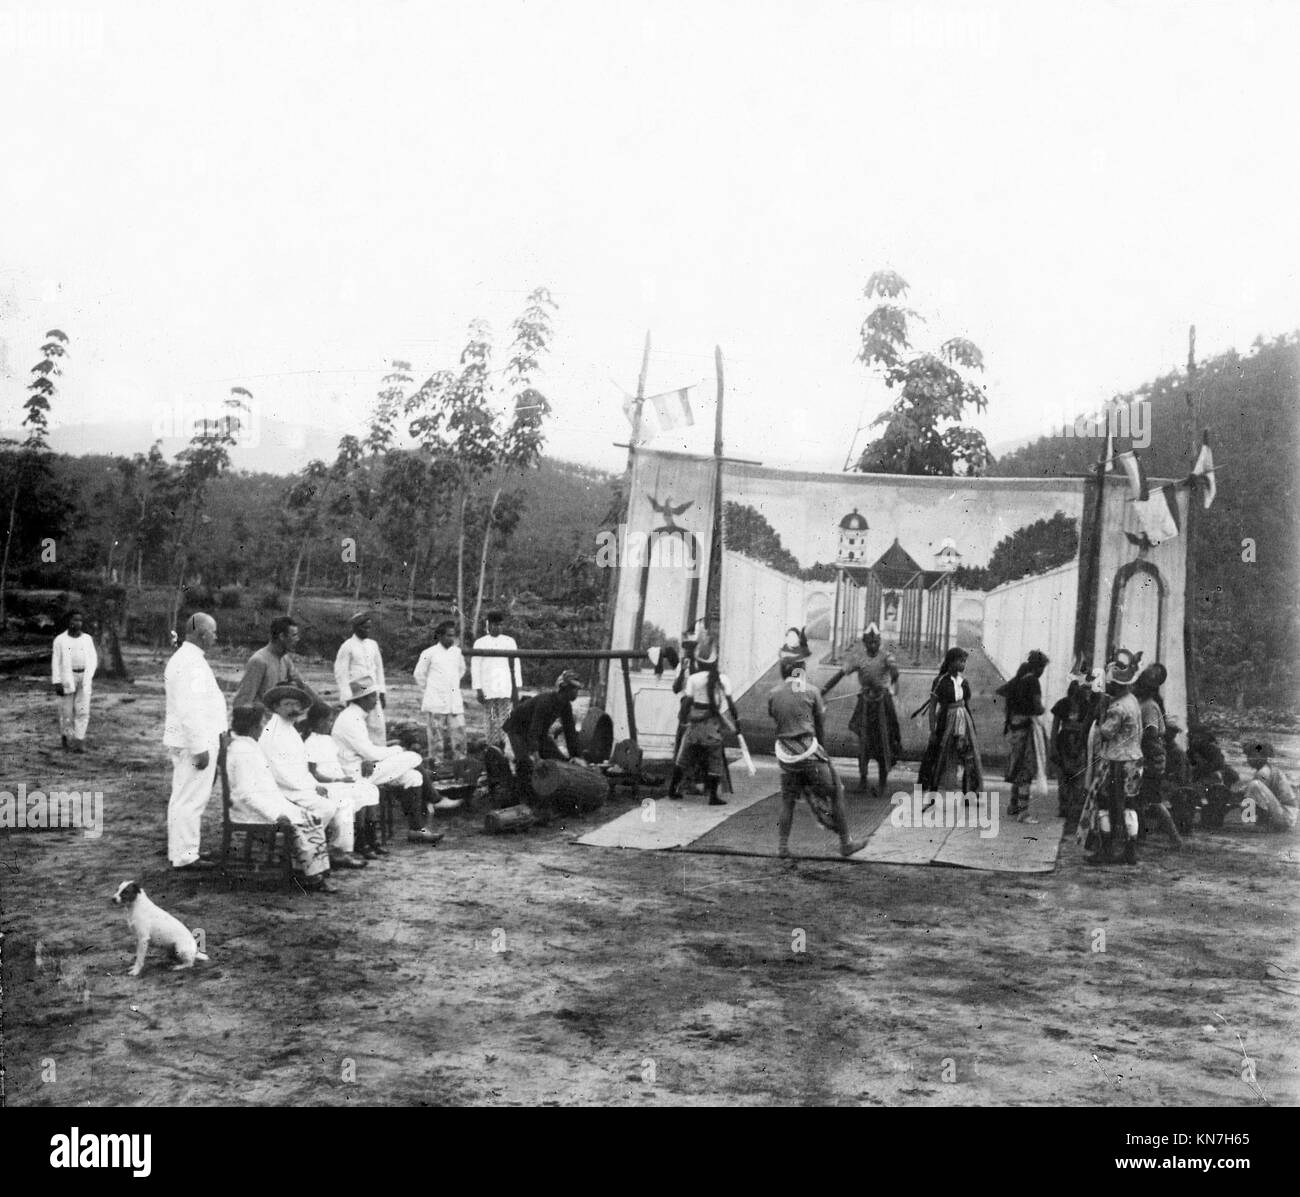 Wayang wang travelling dance theatre in East Java Indonesia in 1914 Stock Photo